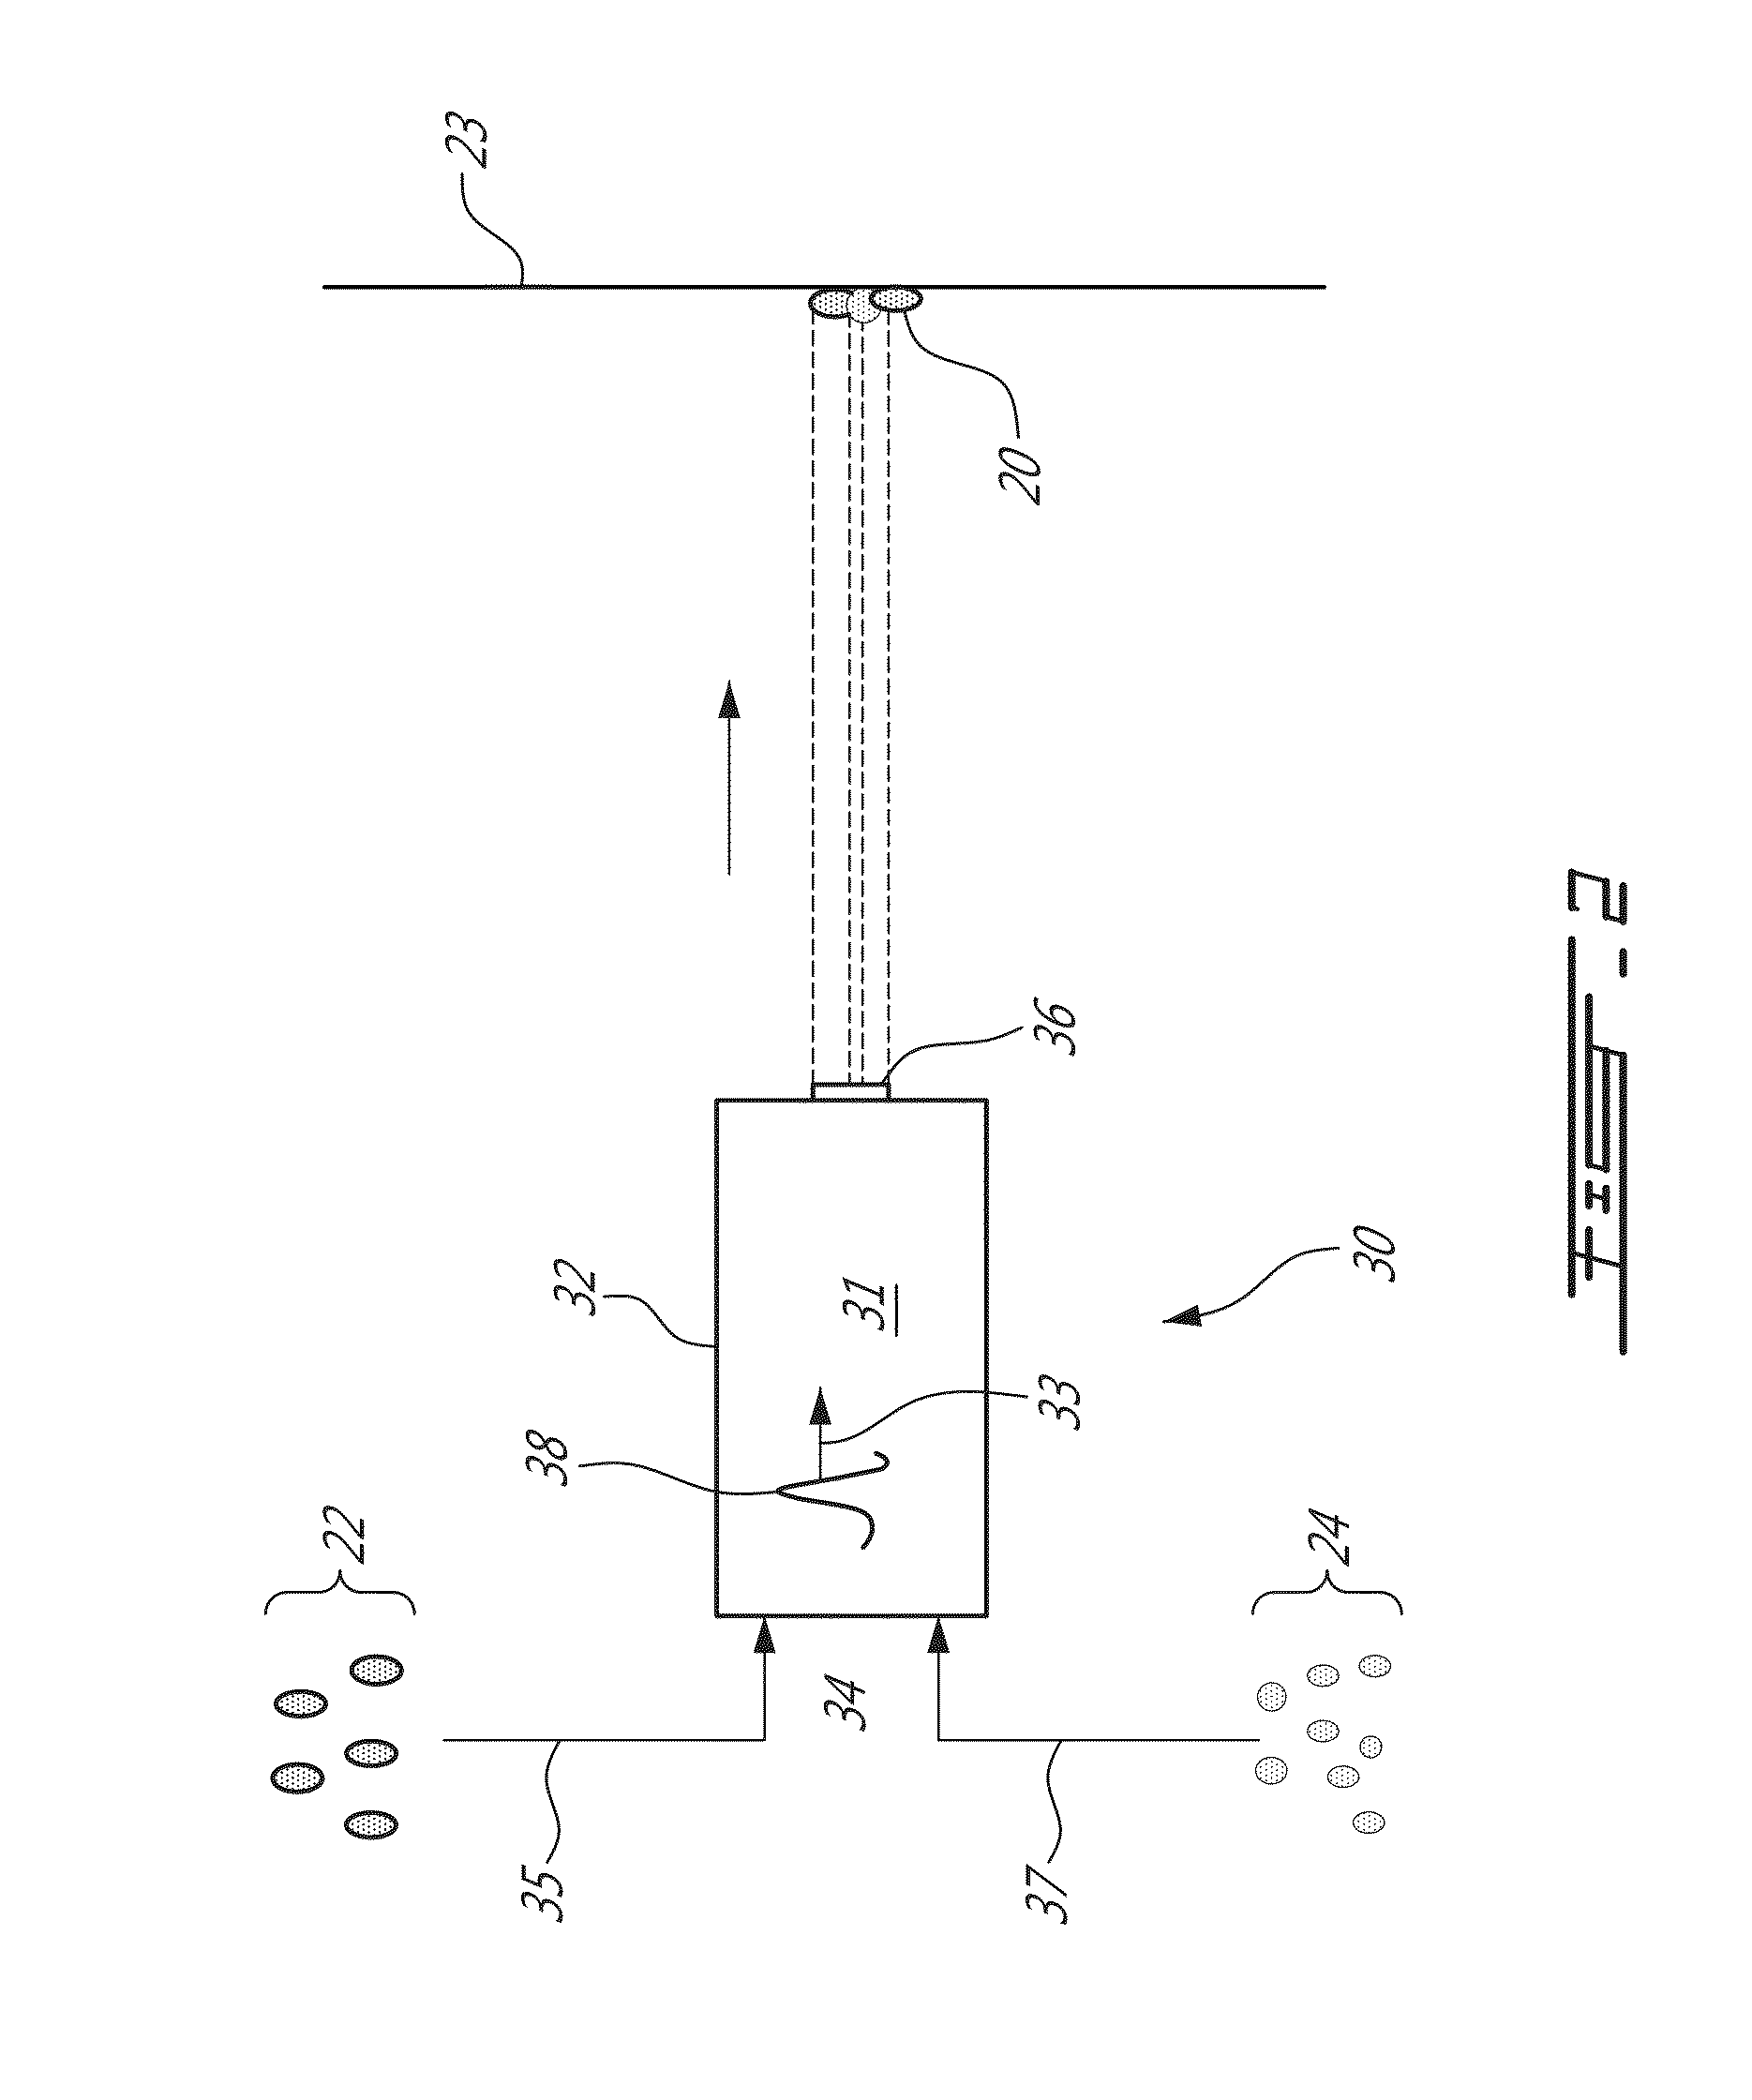 Method of forming an abradable coating for a gas turbine engine